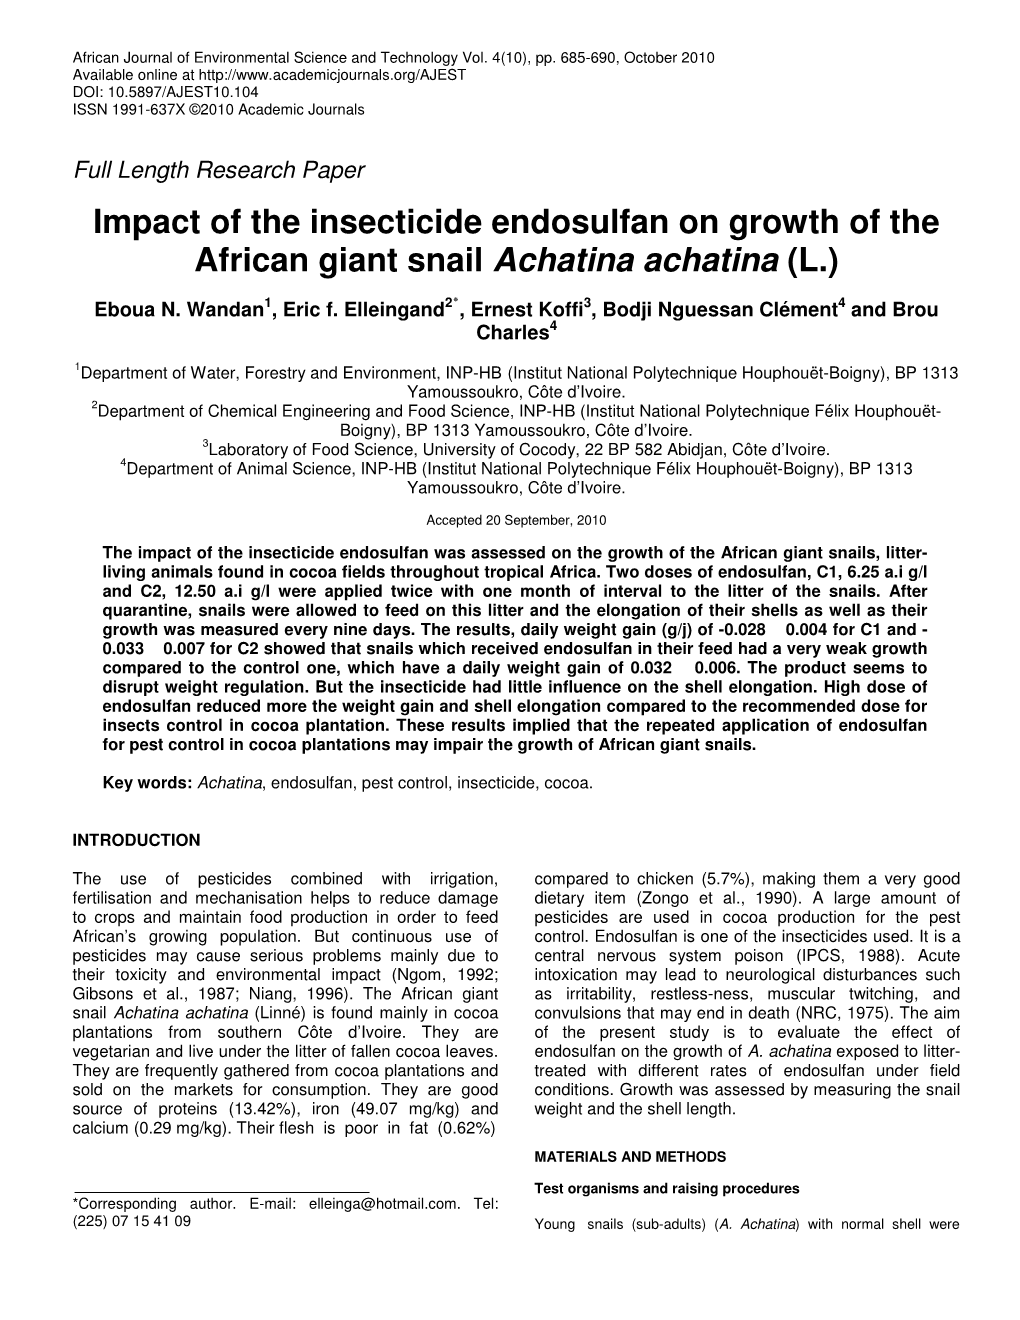 Impact of the Insecticide Endosulfan on Growth of the African Giant Snail Achatina Achatina (L.)